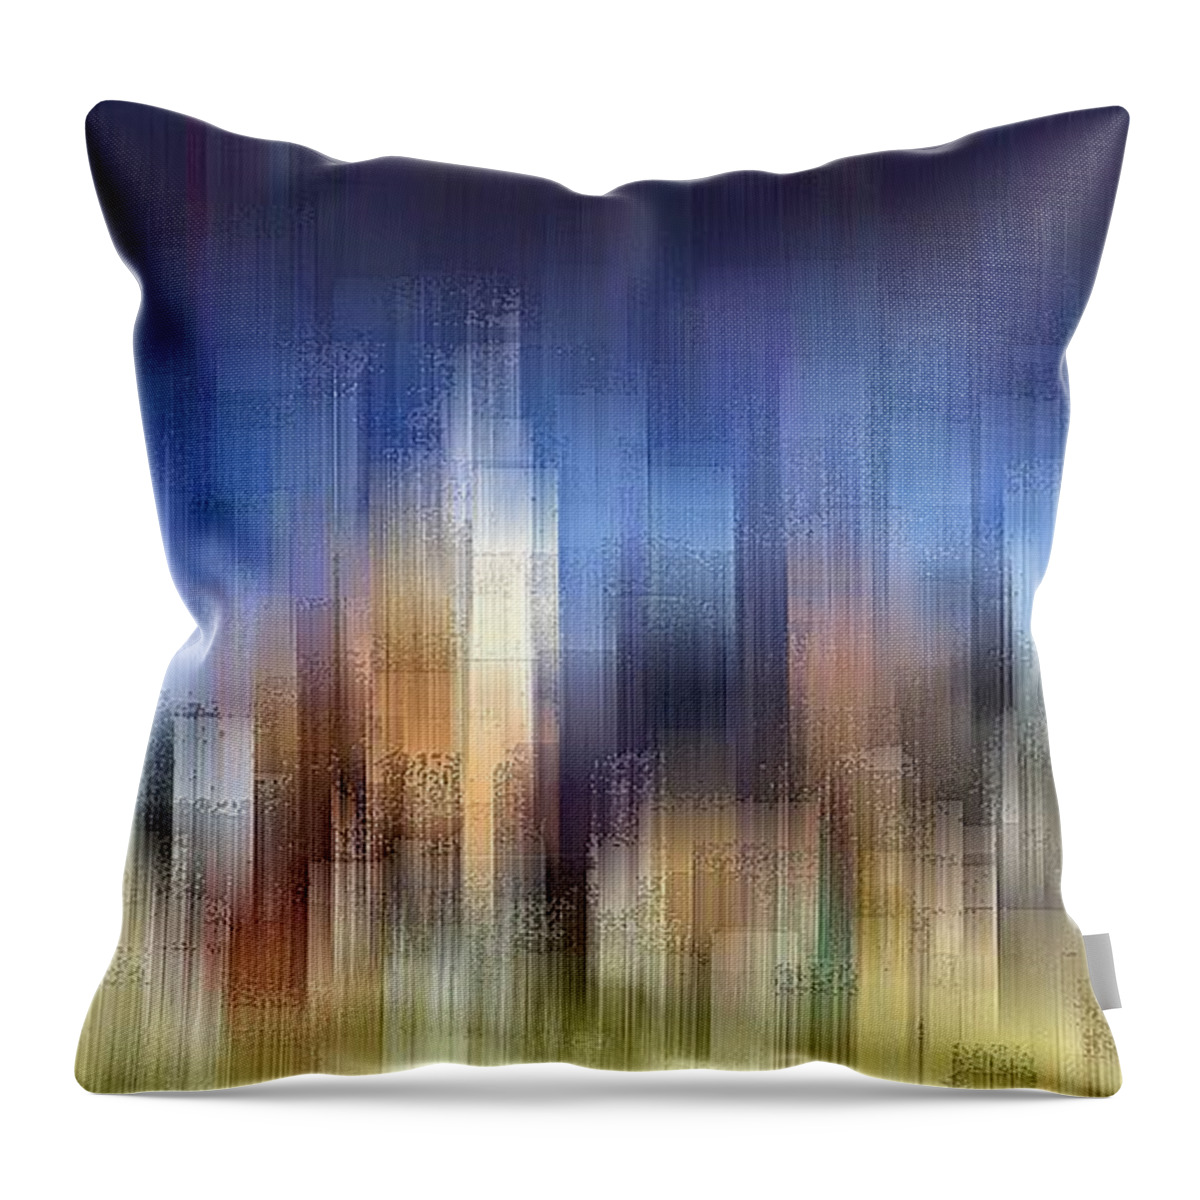 City Throw Pillow featuring the digital art My City Dreams by David Manlove